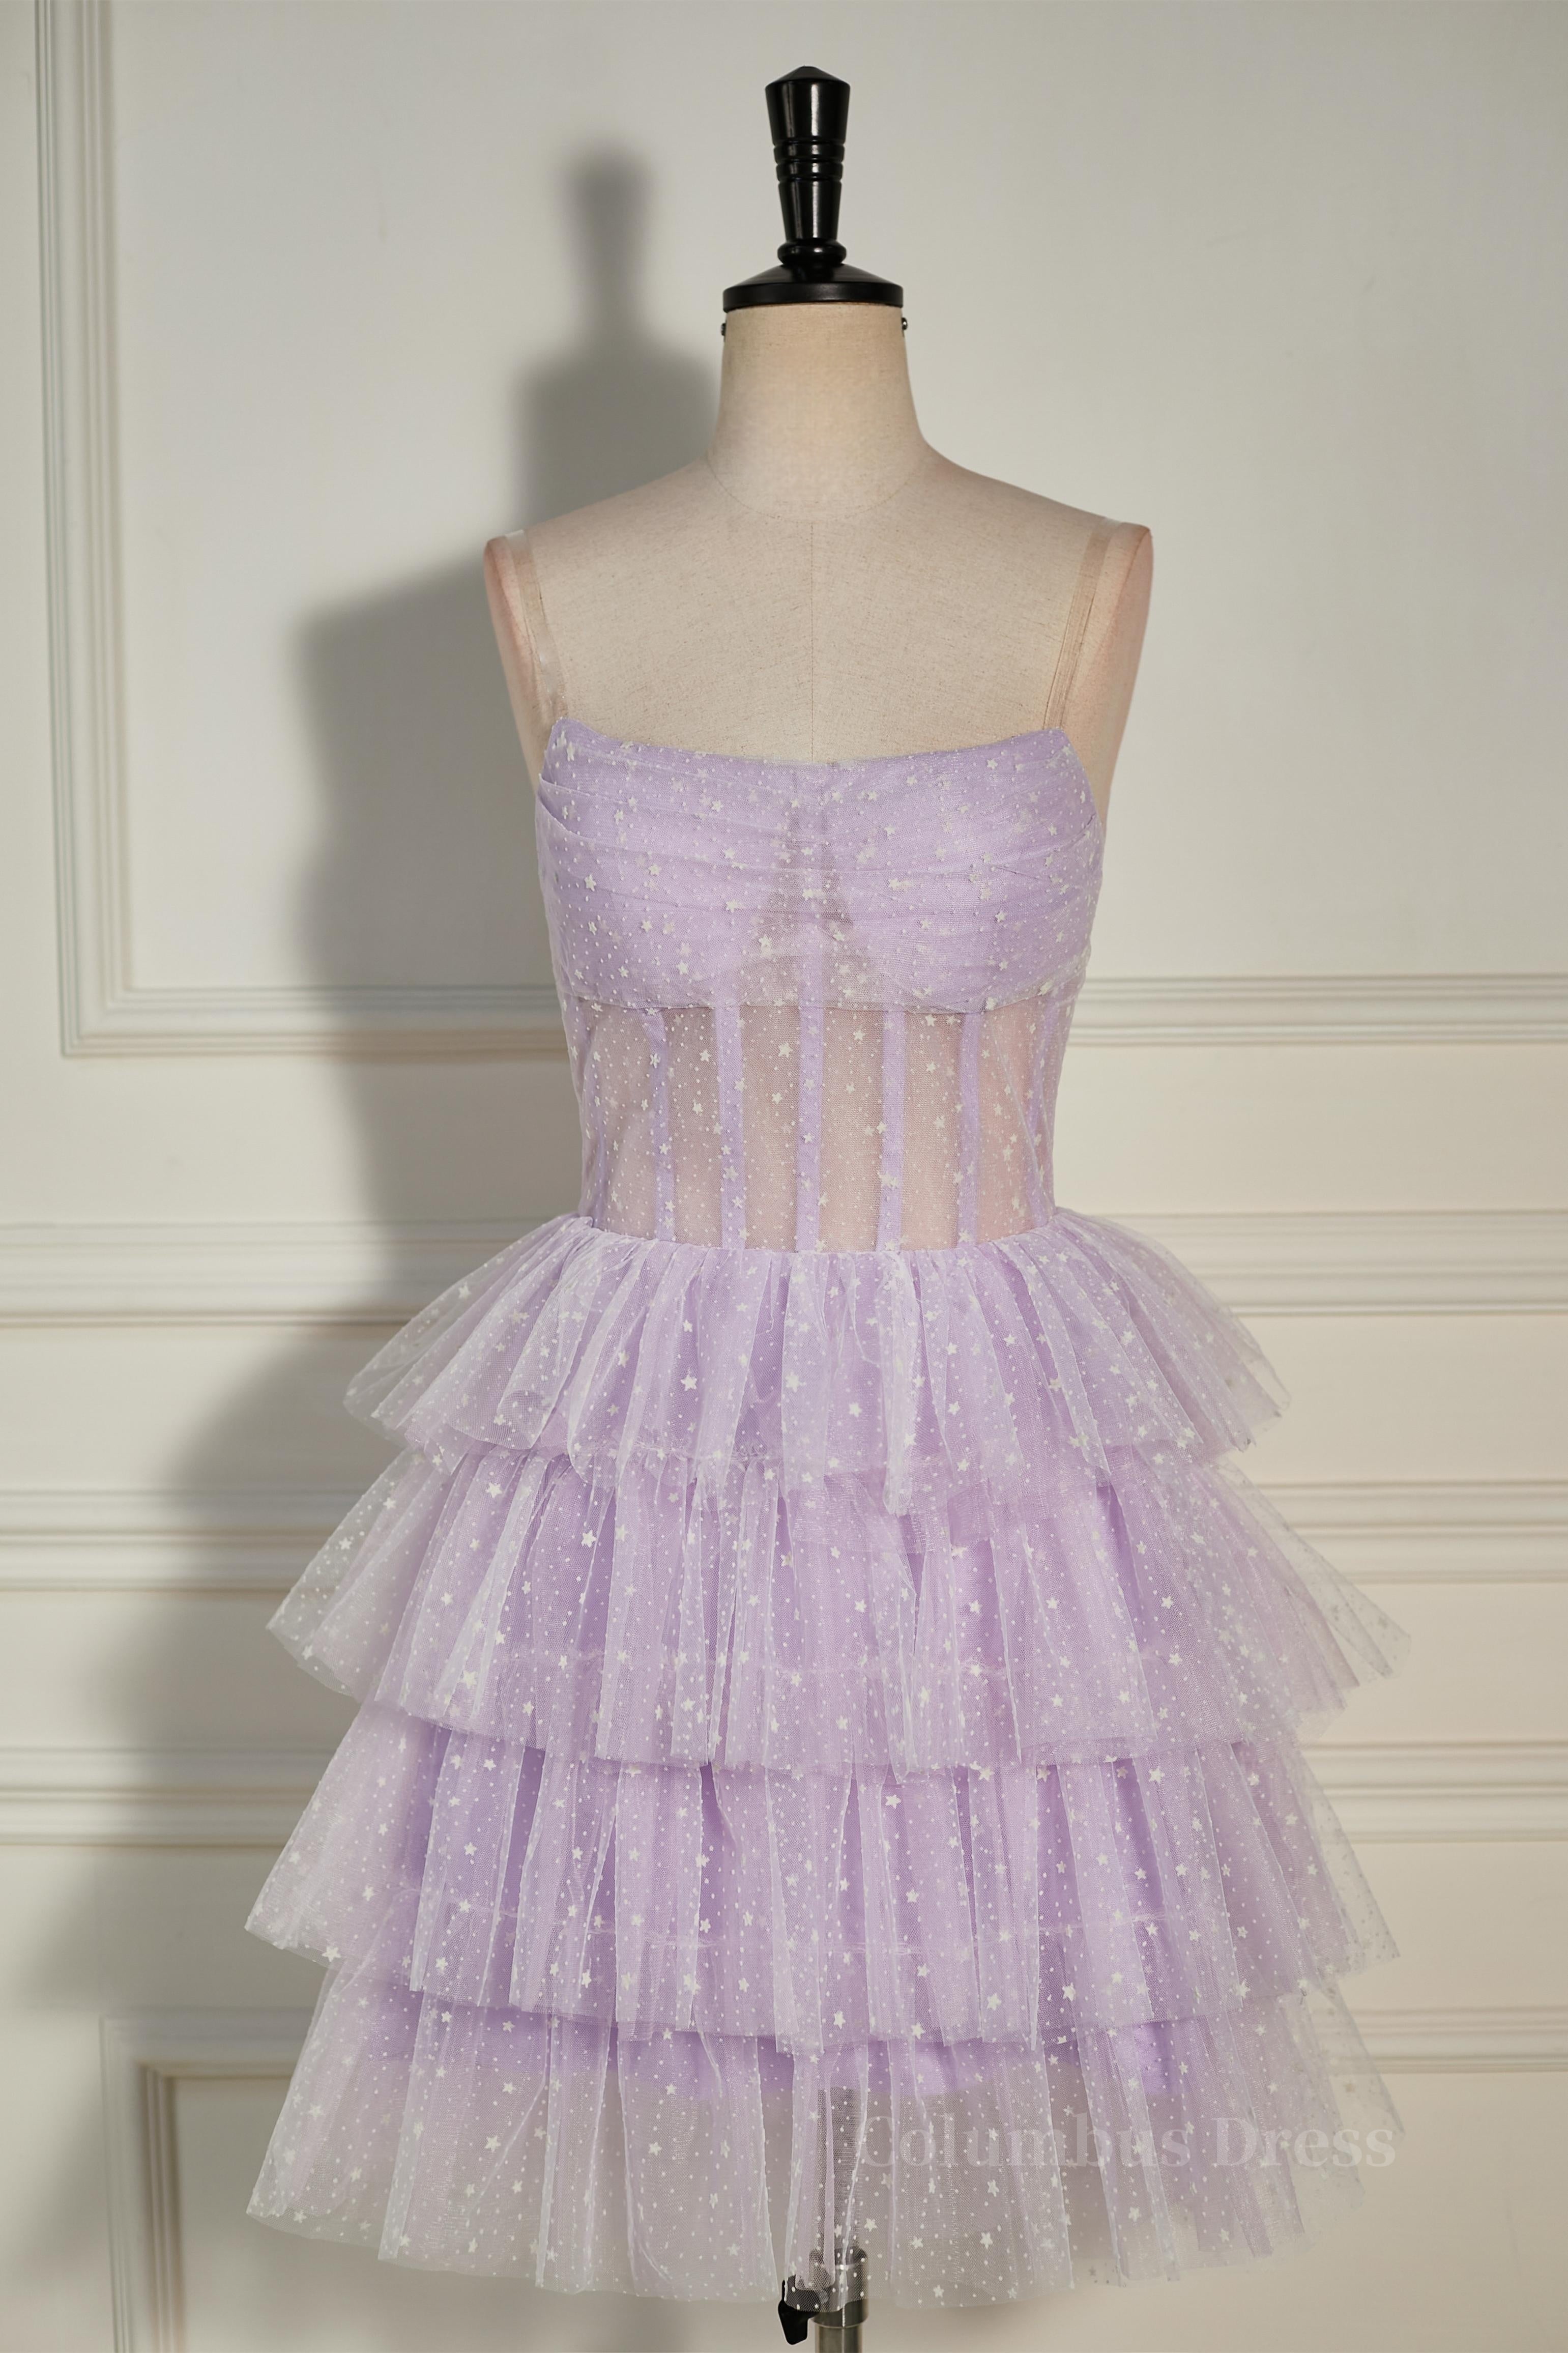 Lavender Strapless Dot Tulle Multi-Layers Corset Homecoming Dress outfit, Prom Dresses Blushes